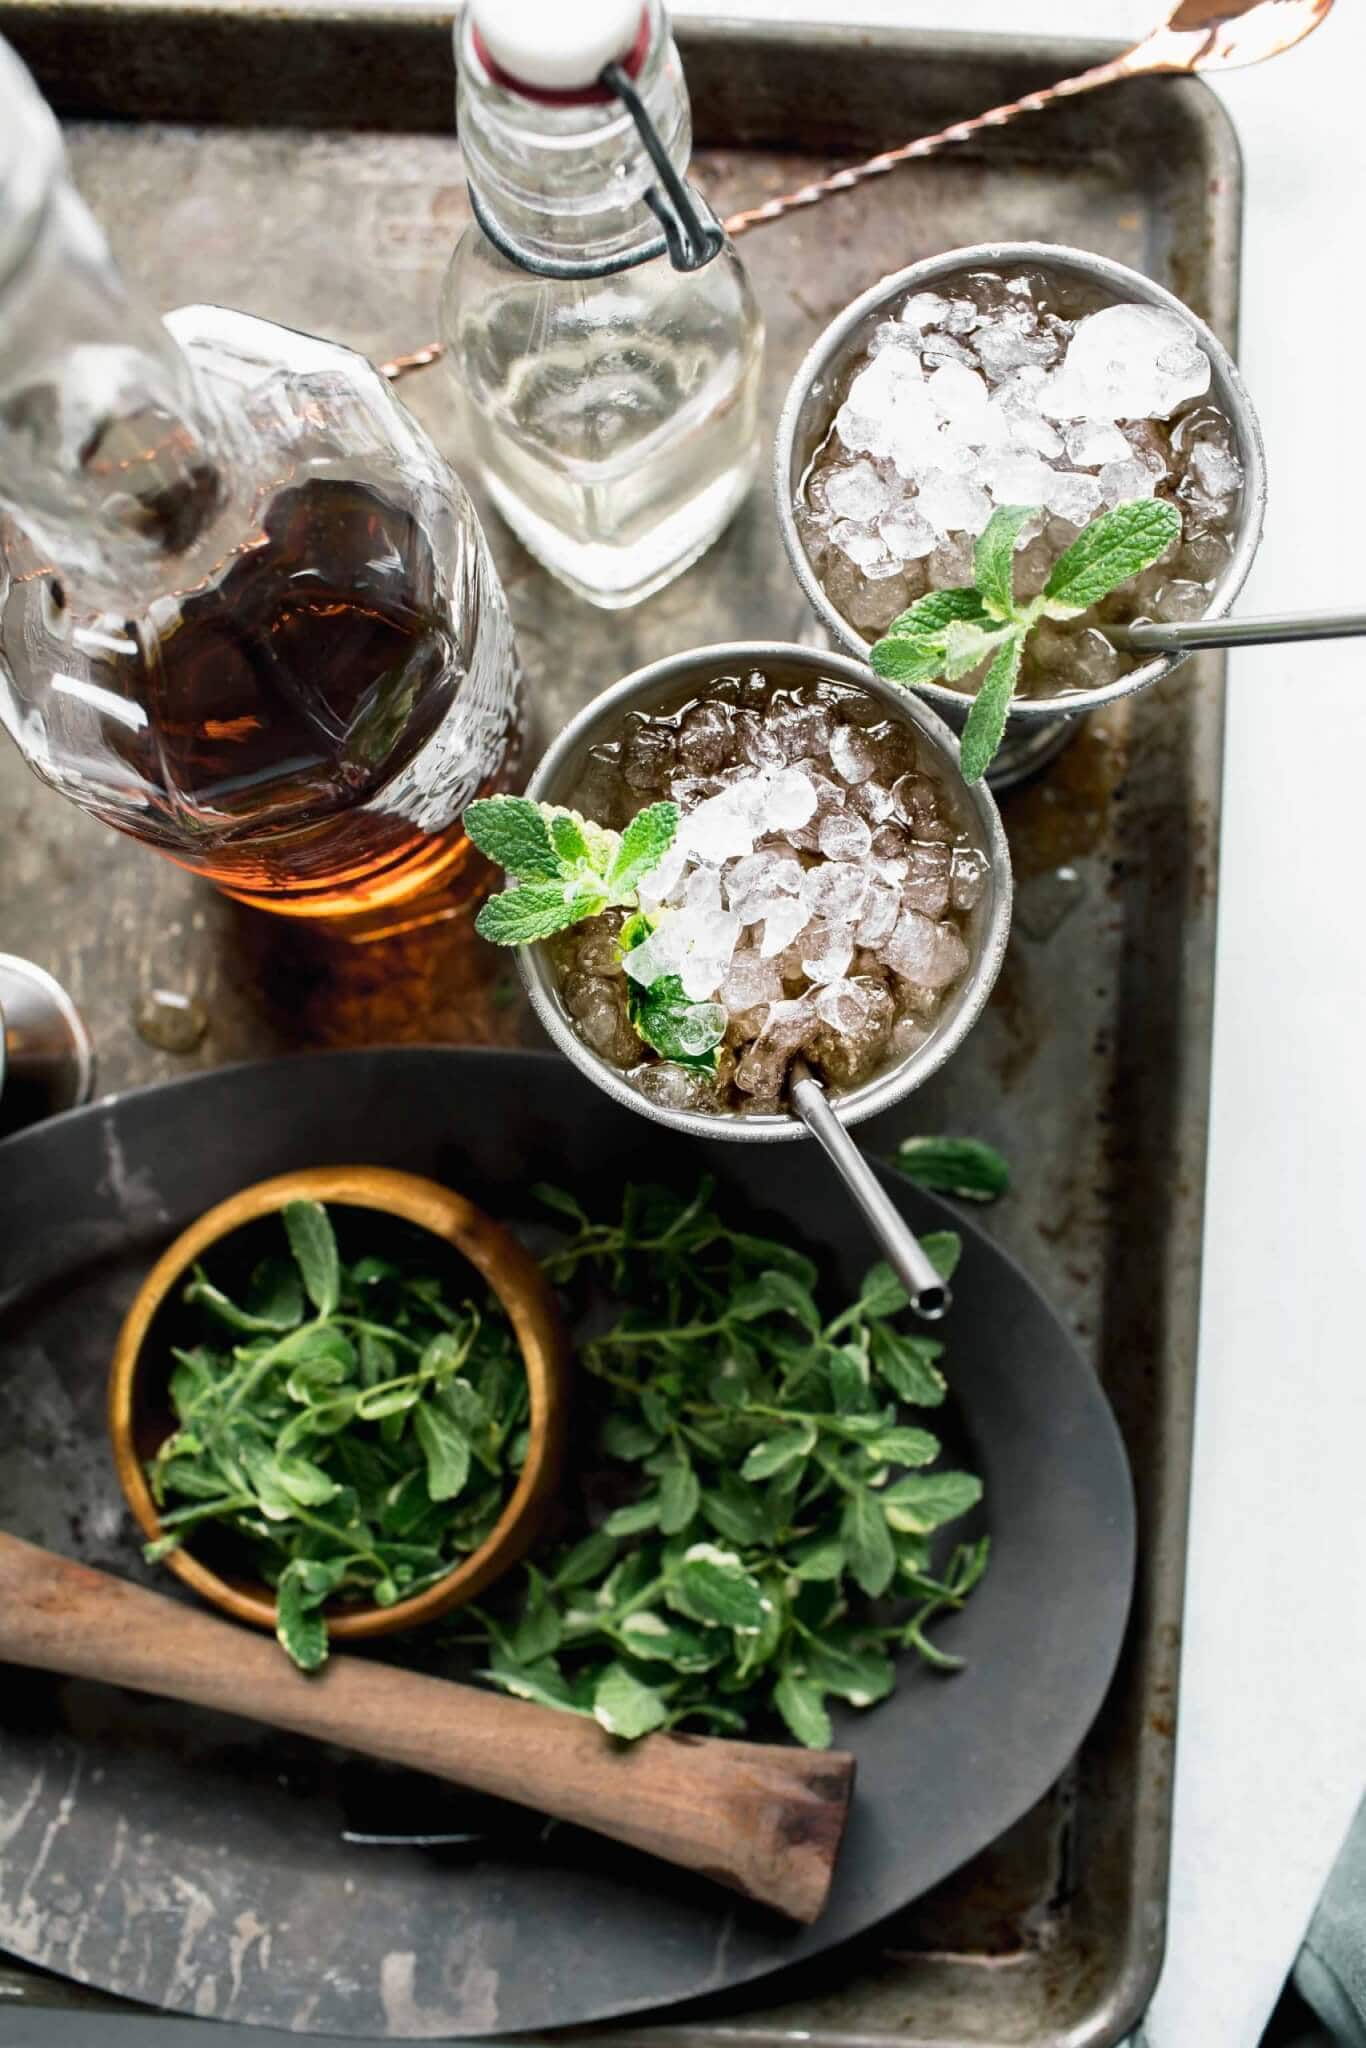 Two assembled mint juleps on serving tray